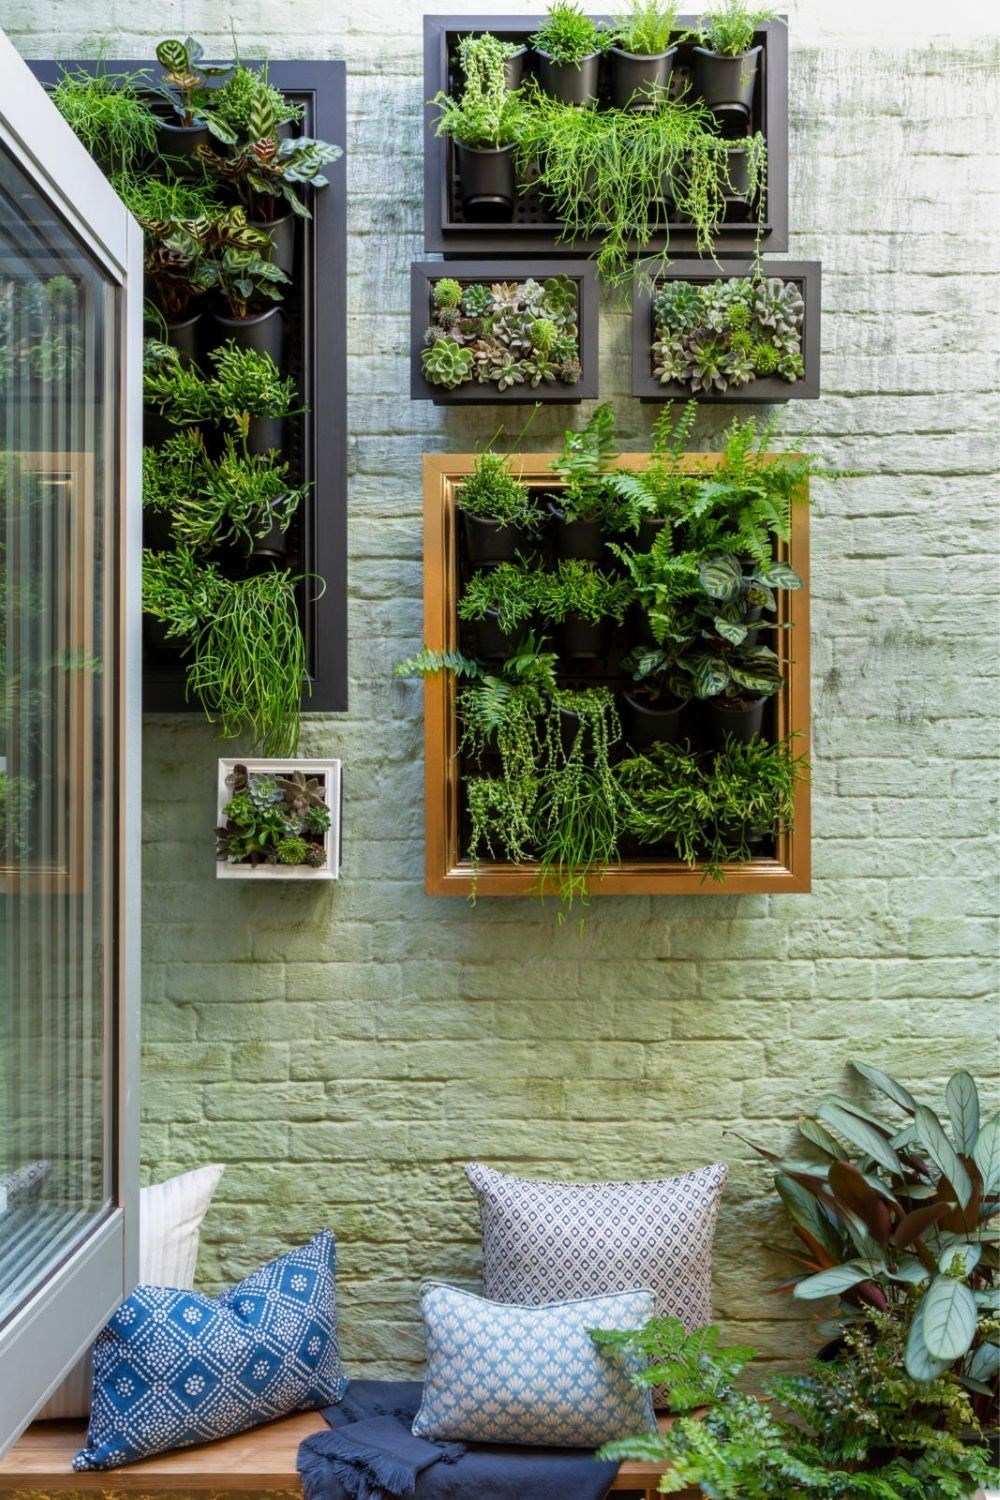 How to make a vertical garden with frames | Better Homes and Gardens